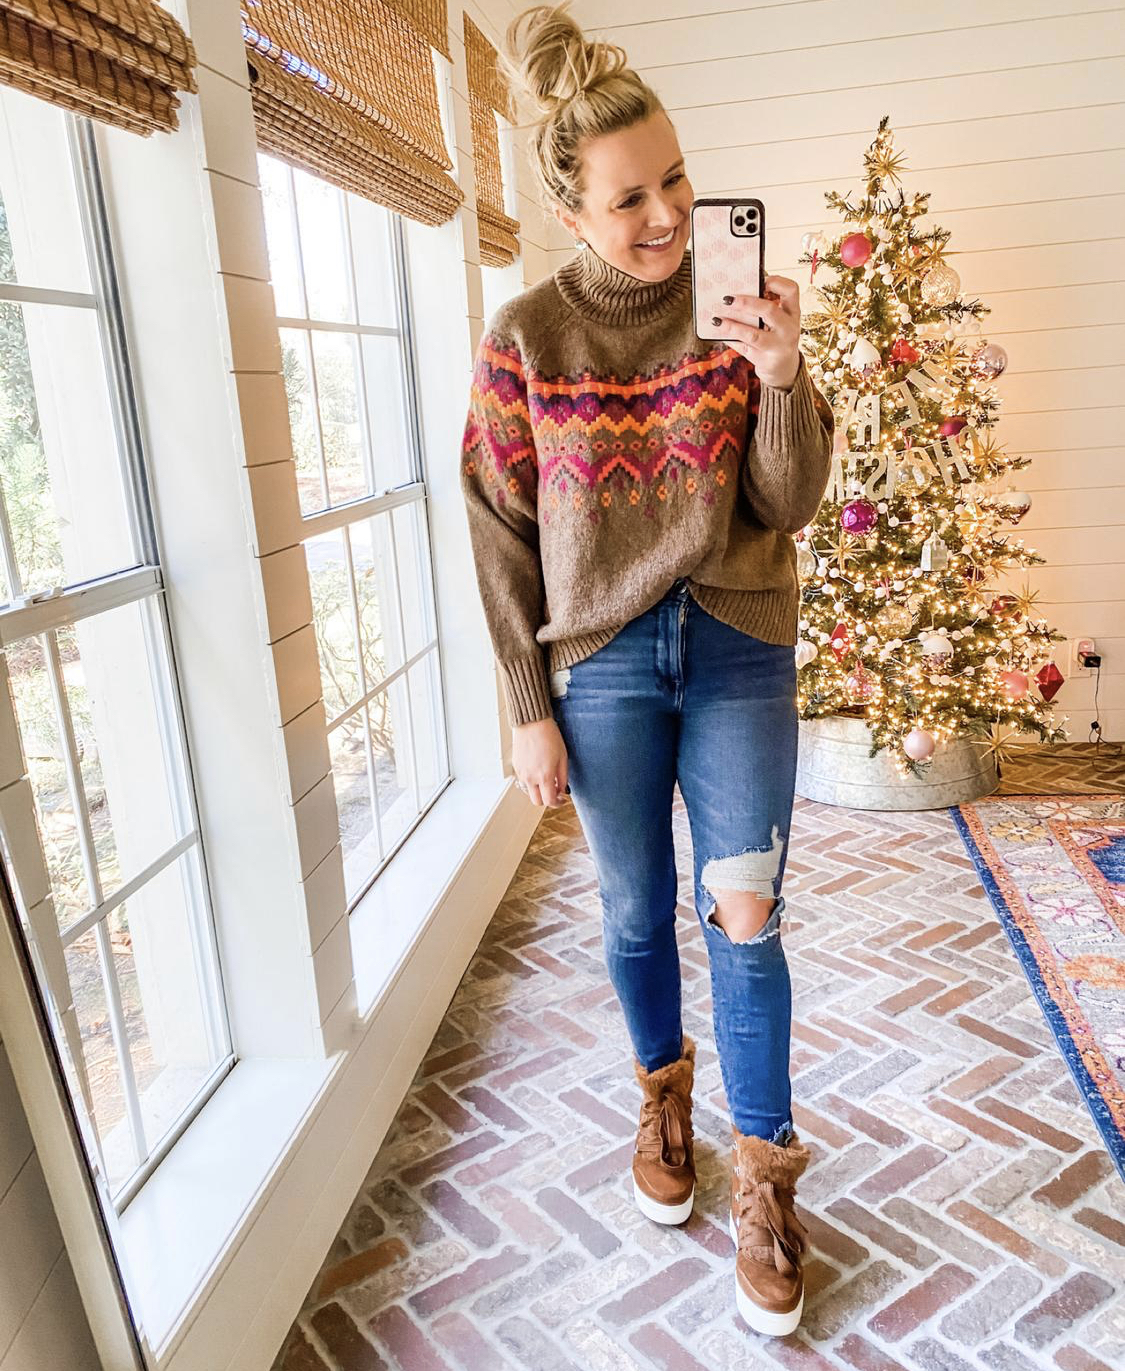 December Outfits by popular Houston fashion blog, Fancy Ashley: image of a woman standing in front of a Christmas tree decorated with pink, white and silver ornaments and wearing a brown, pink and orange nordic print turtleneck sweater, distressed denim, and brown fur lined hightop sneakers. 